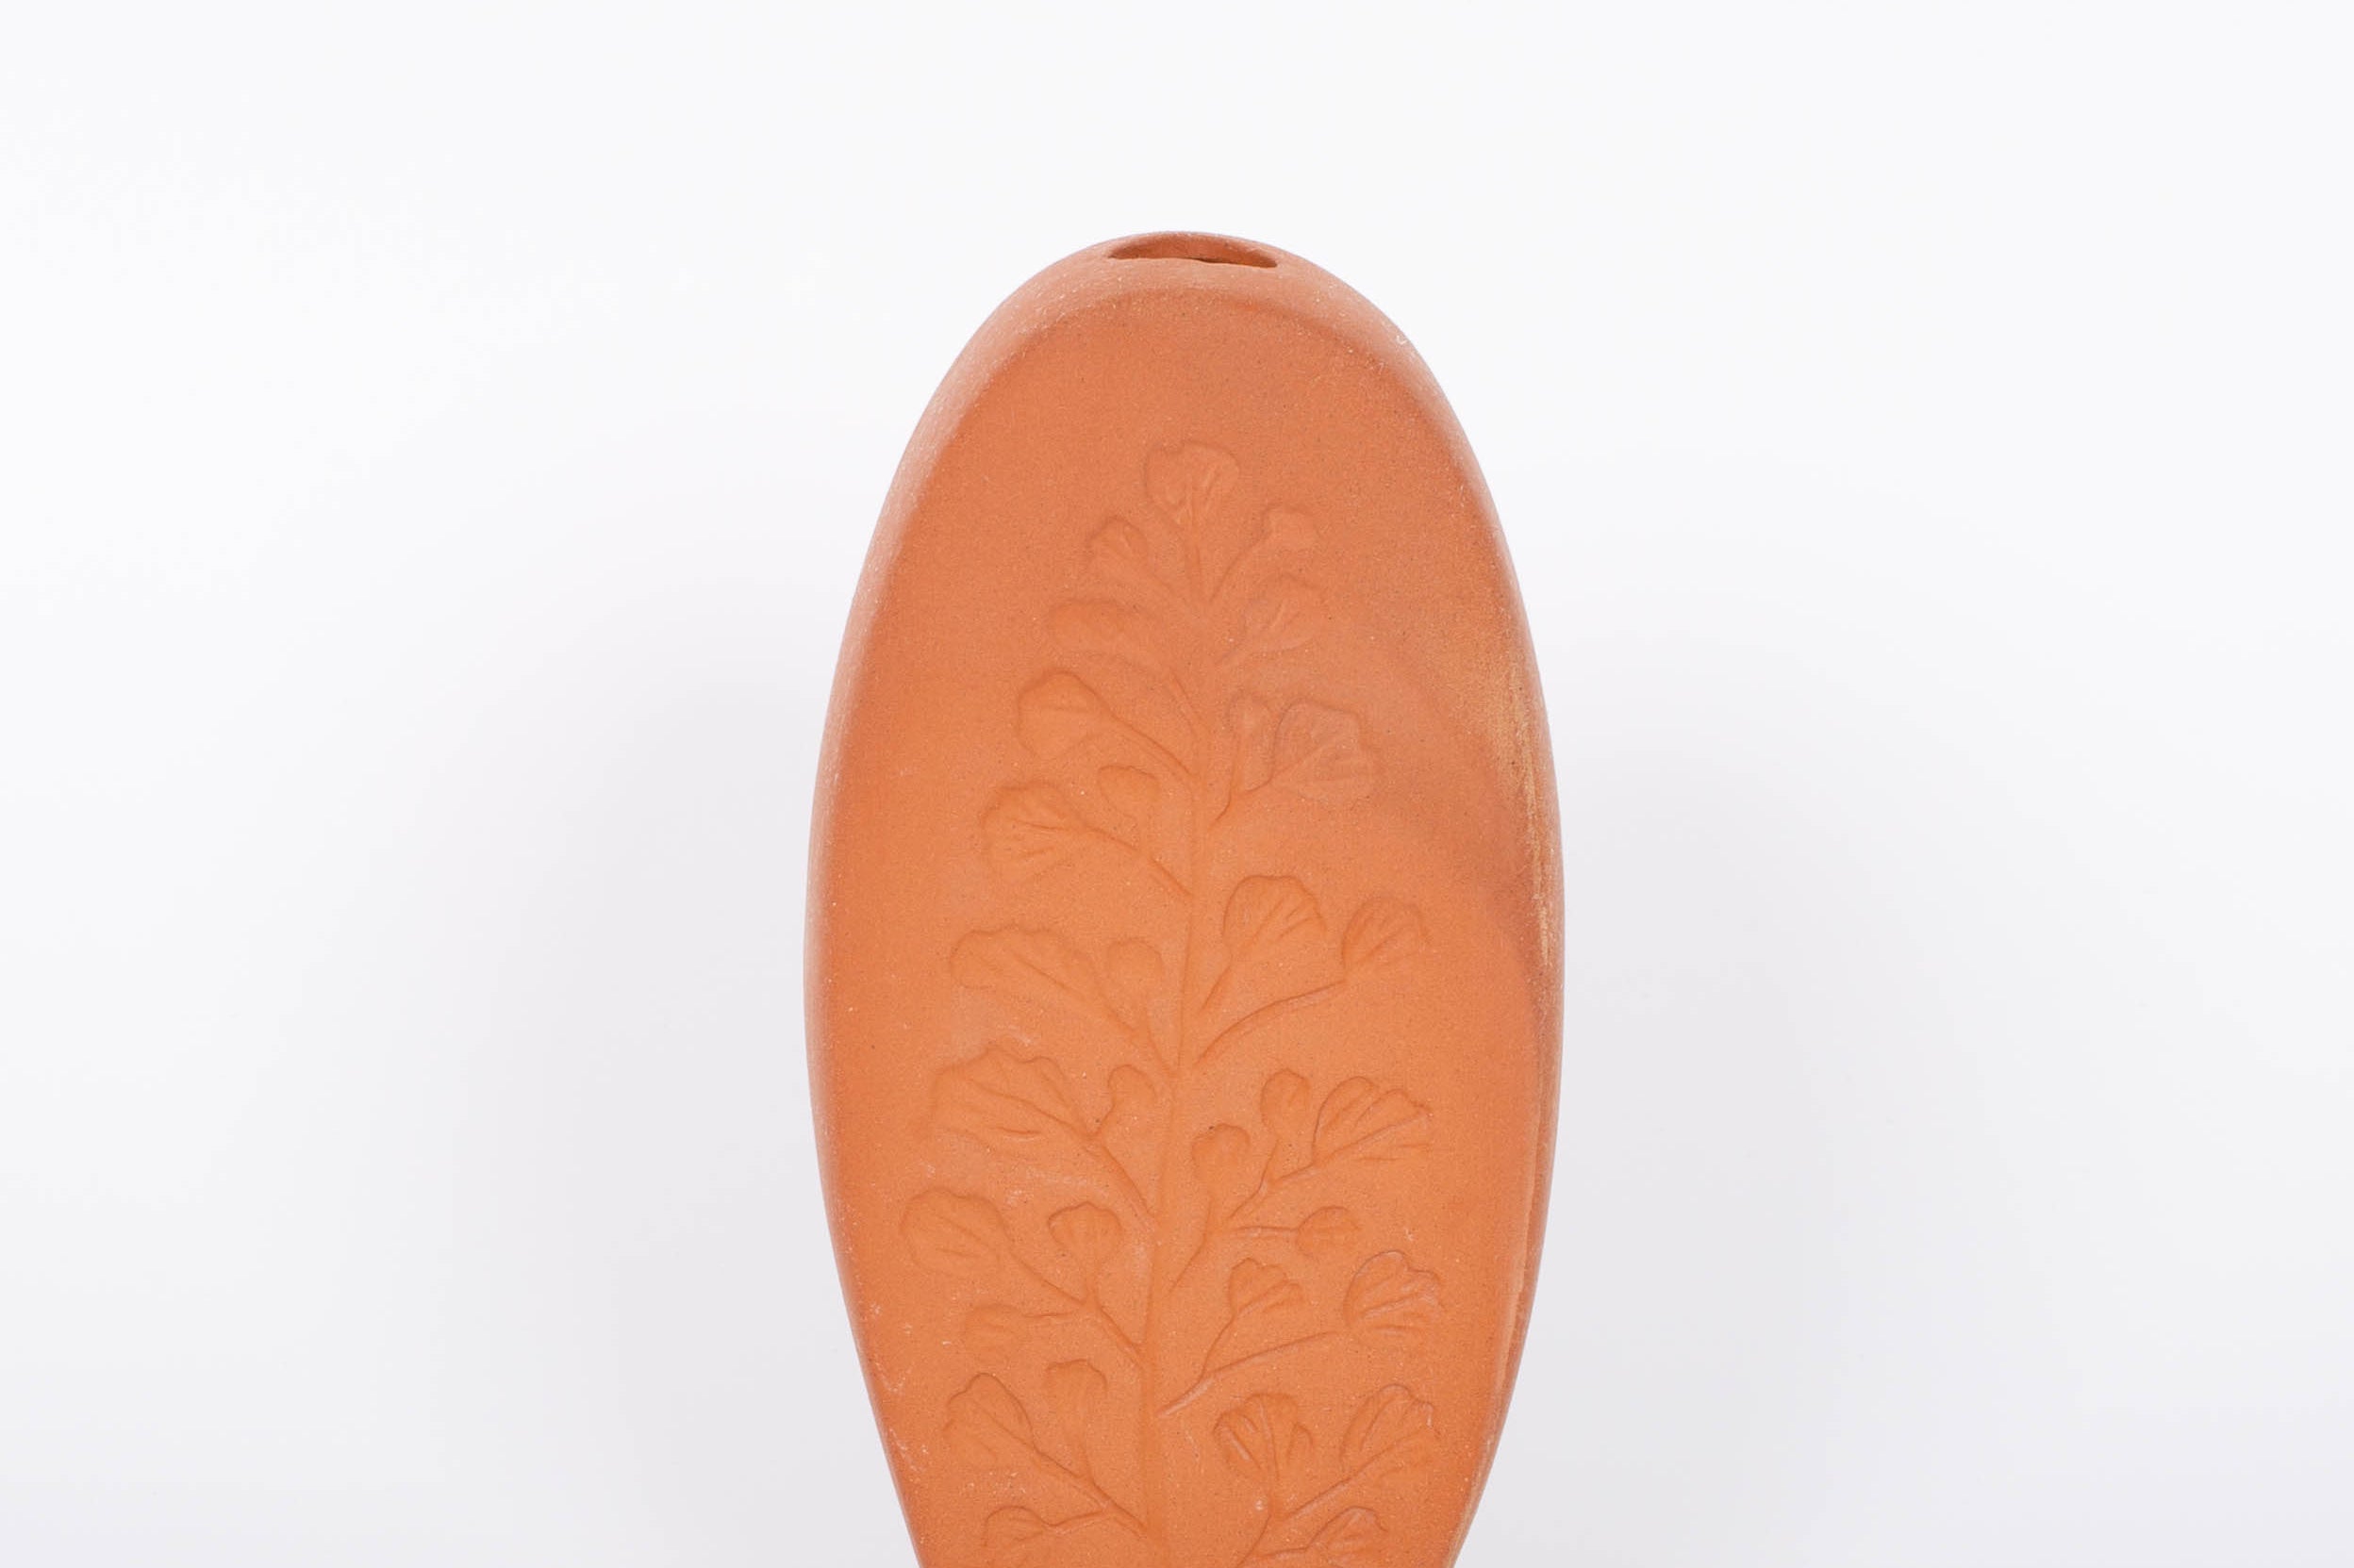 Tall oval Poppy Budvase in terracotta geometric silhouette with imprint of live plant. White background.